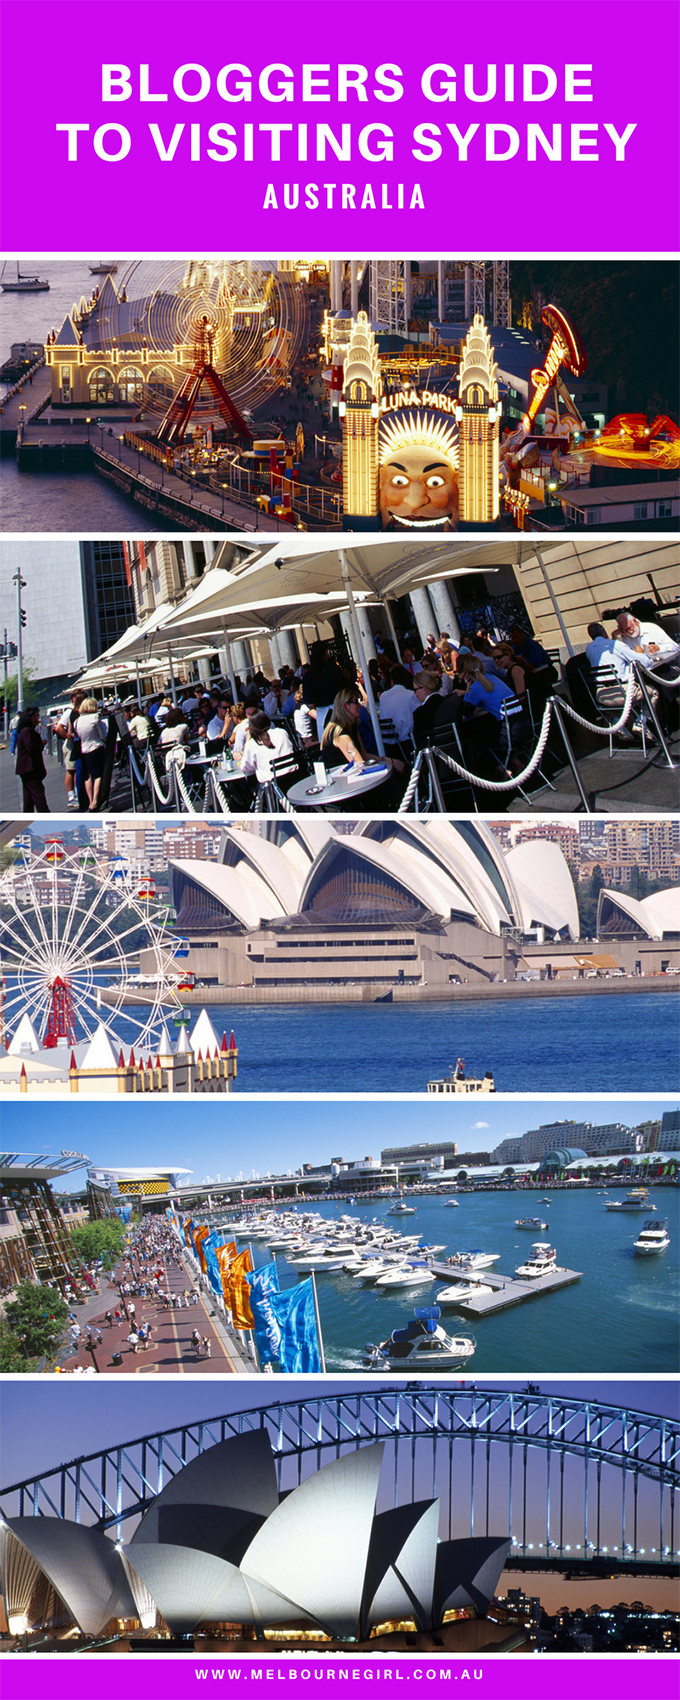 Bloggers Guide to visiting Sydney - Australia